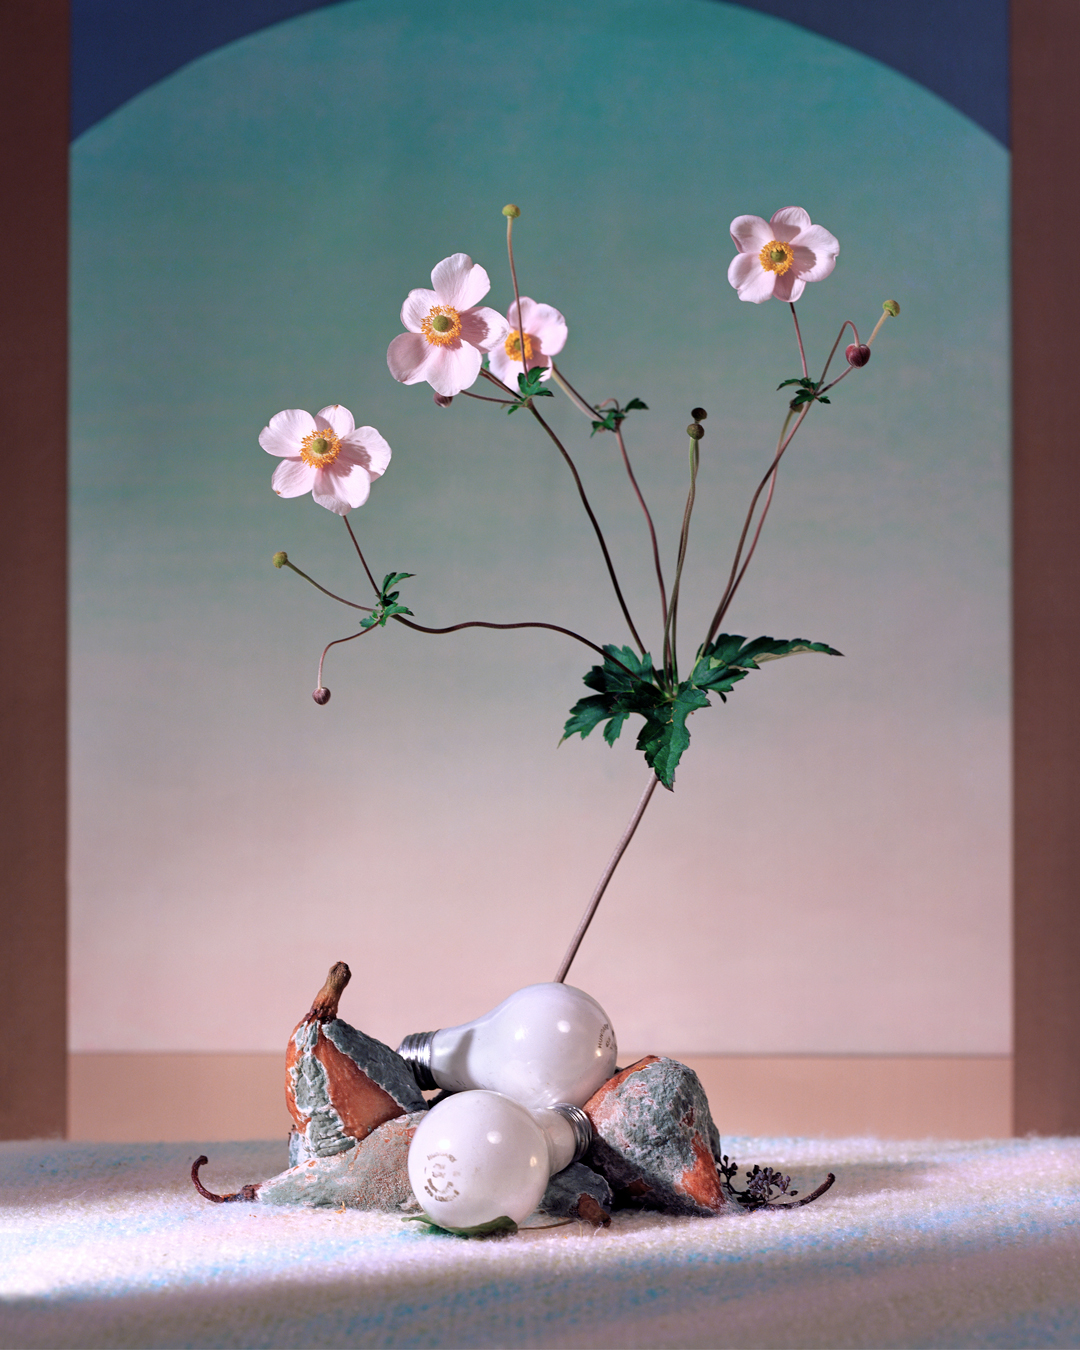 Alex Yudzon - Flowers and Bulbs. From the Still Life series